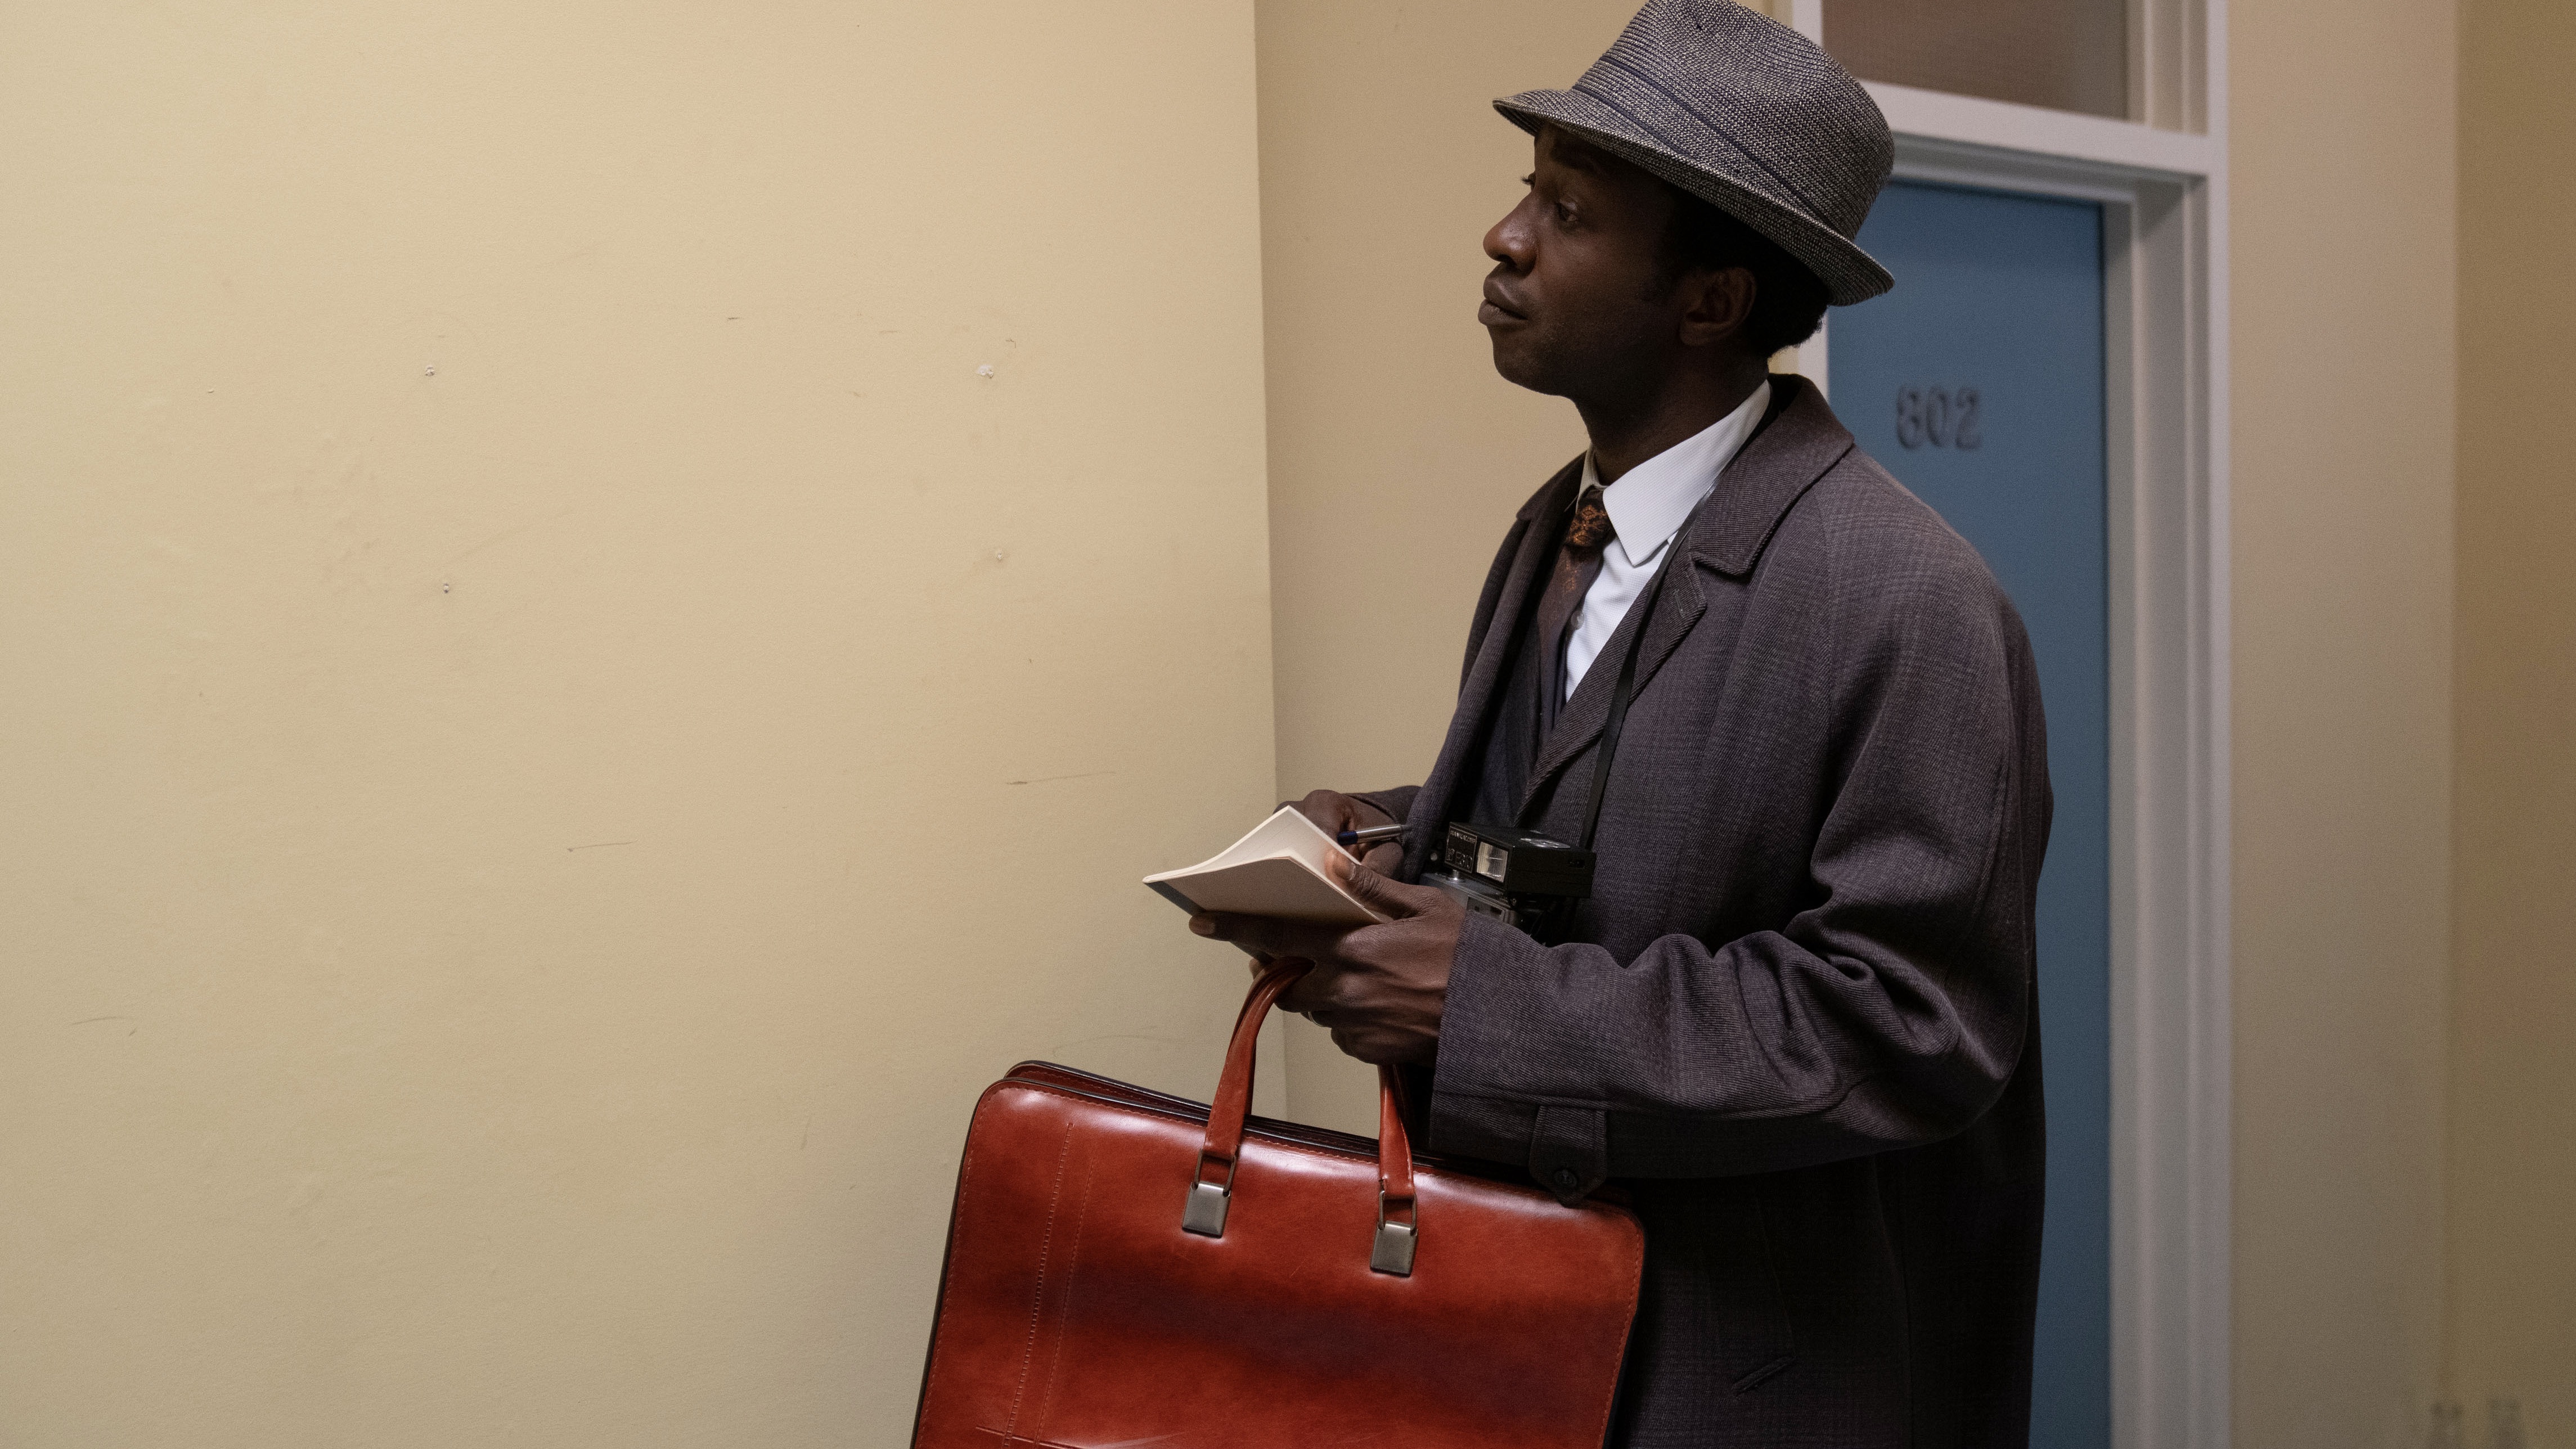 Zephryn Taitte in a suit and hat with a briefcase in Cal the Midwfe.